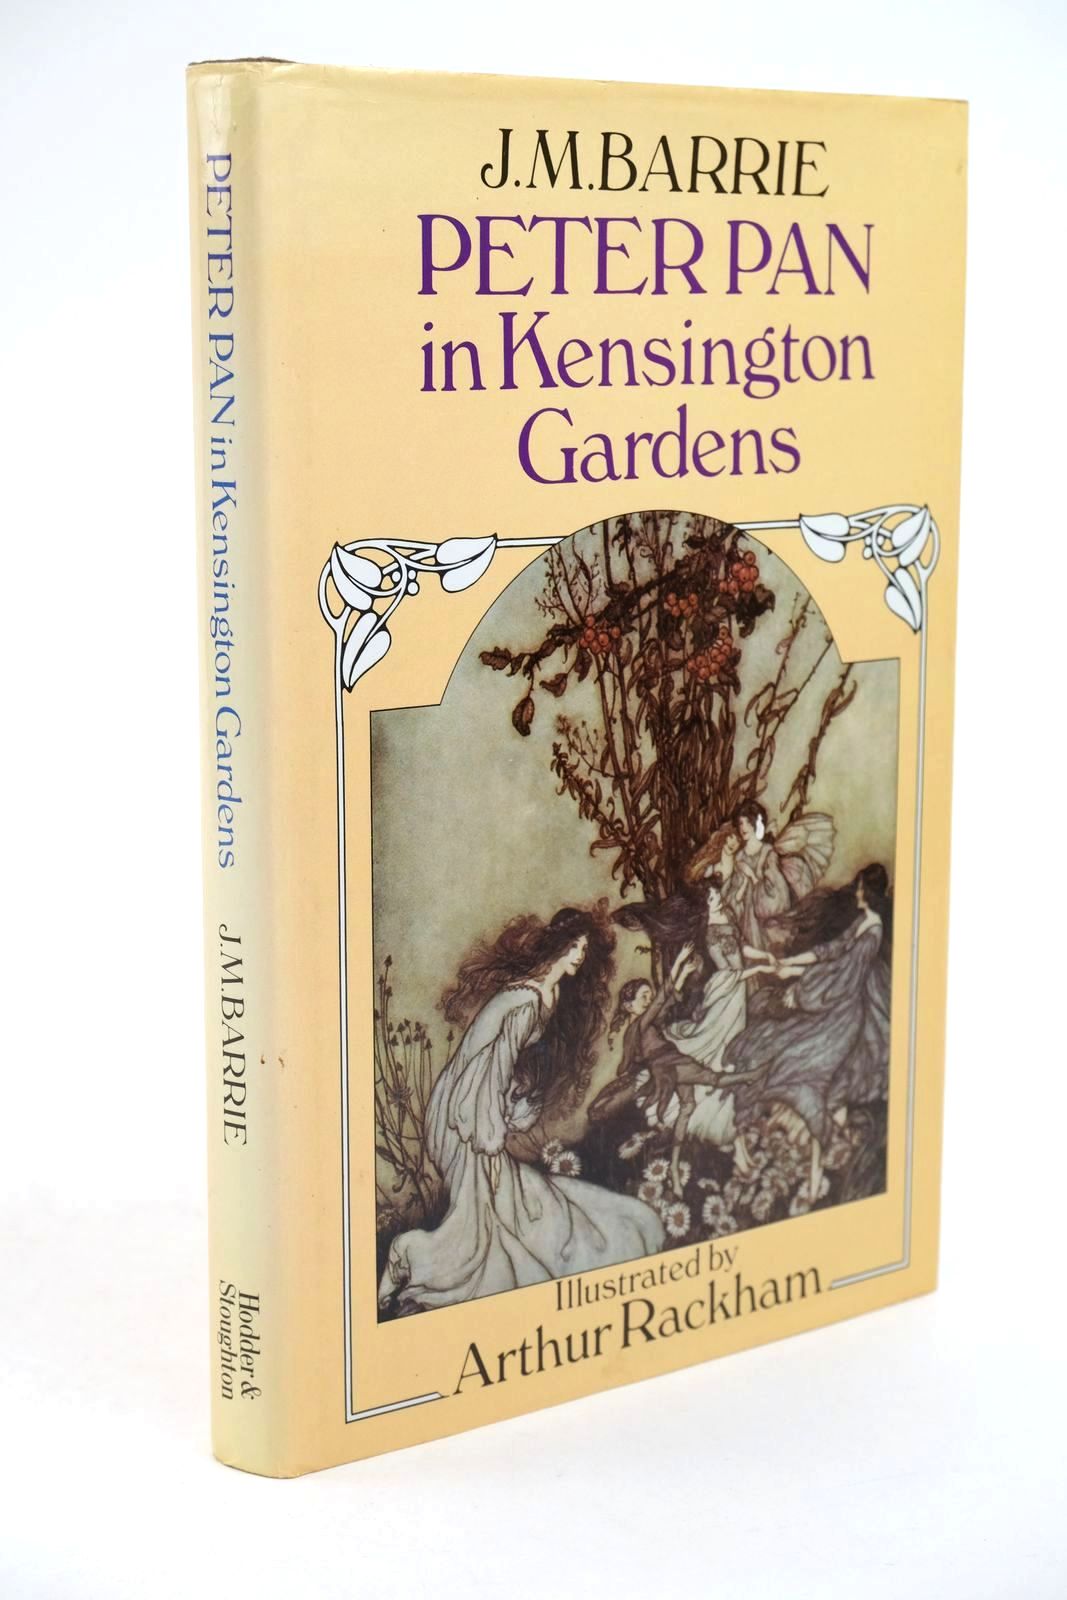 Photo of PETER PAN IN KENSINGTON GARDENS written by Barrie, J.M. illustrated by Rackham, Arthur published by Hodder &amp; Stoughton (STOCK CODE: 1323120)  for sale by Stella & Rose's Books